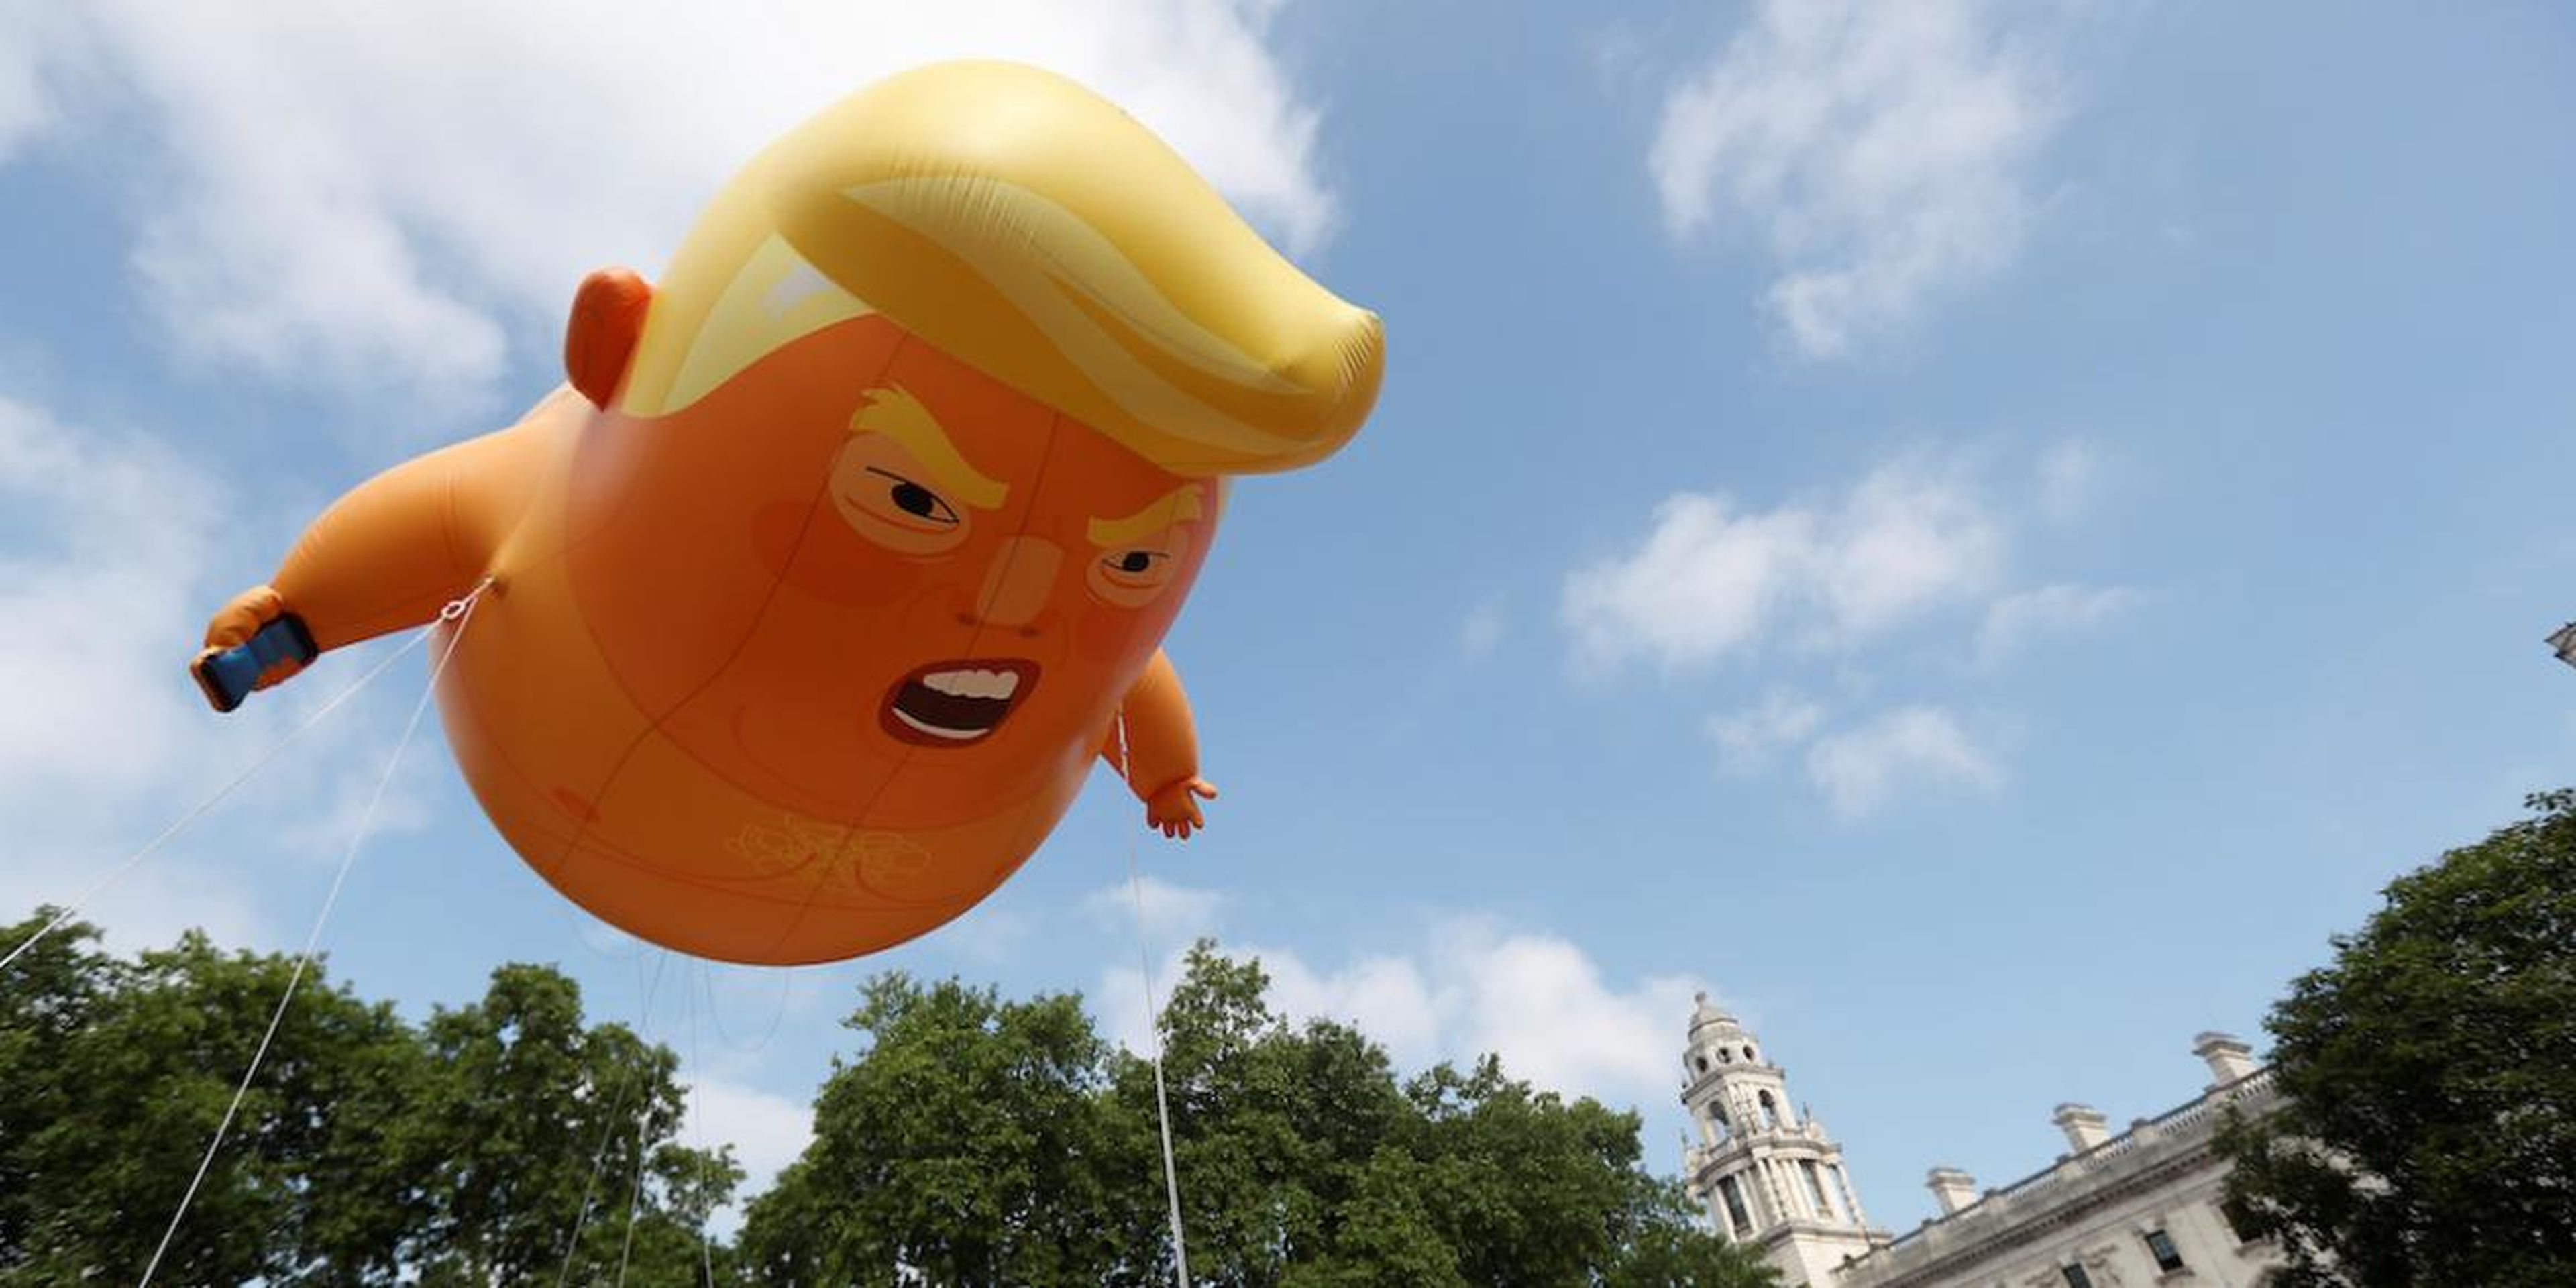 The blimp in London's Parliament Square in July.